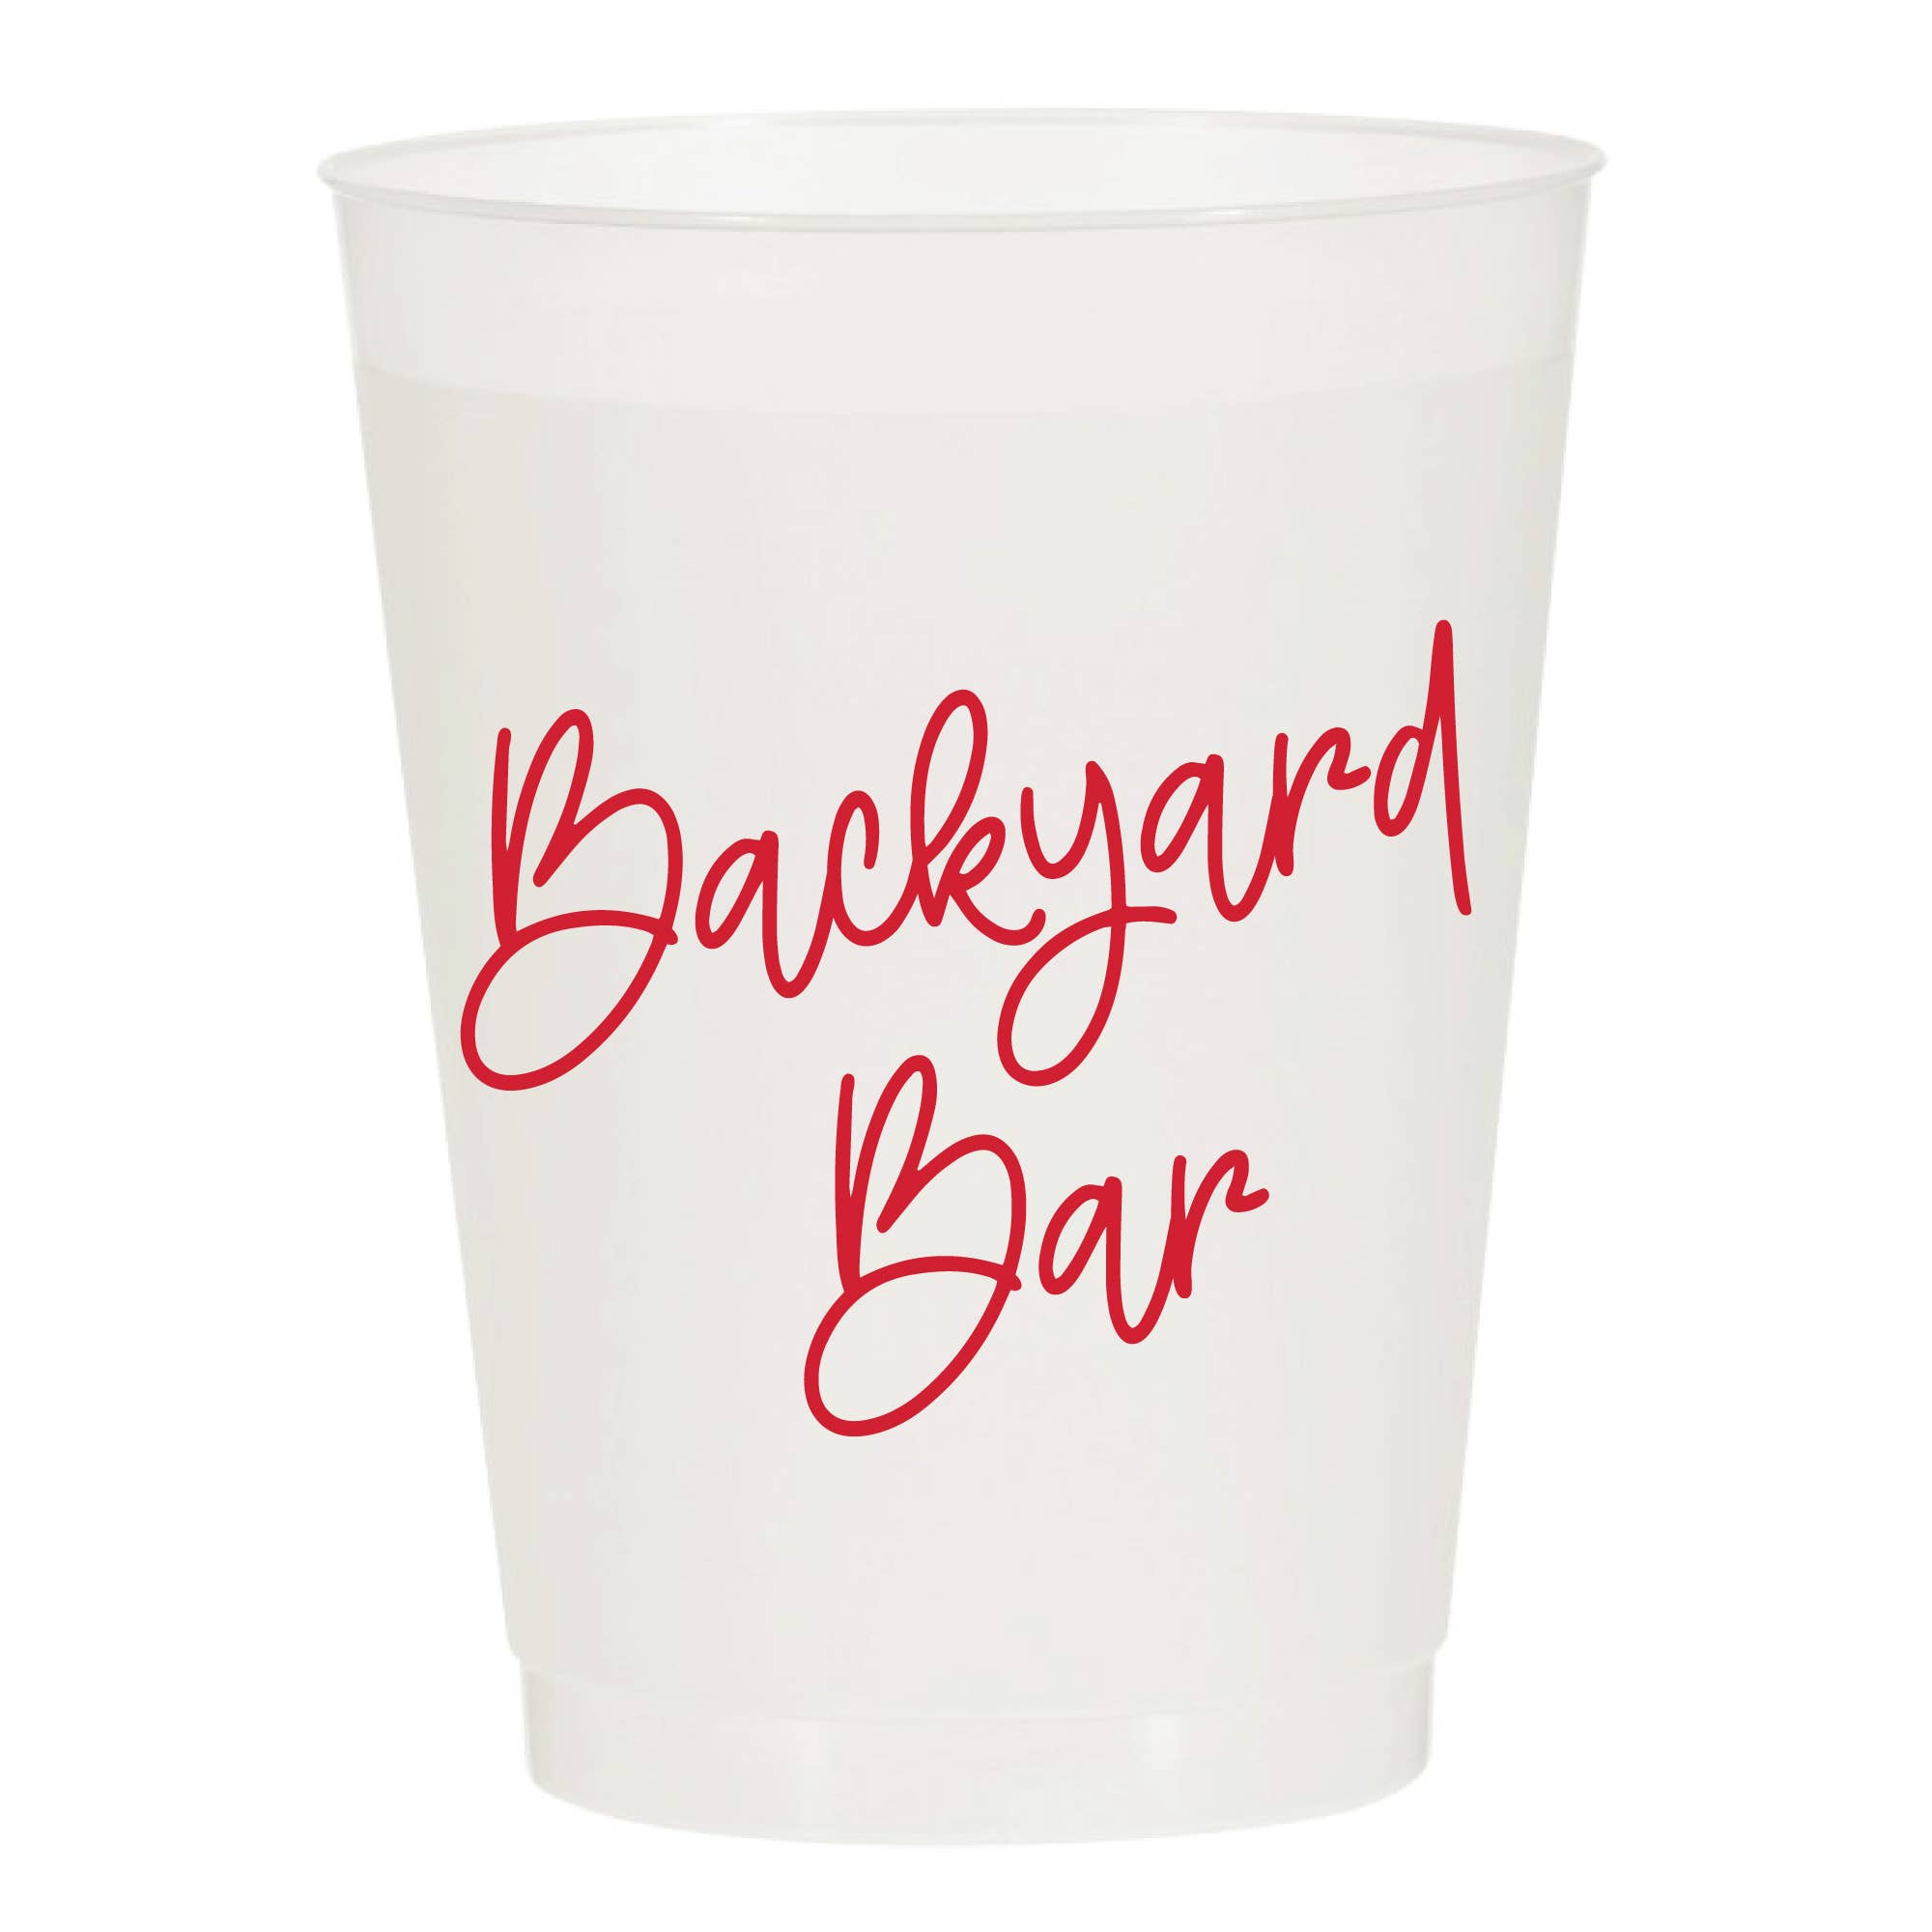 Backyard Bar Reusable Cups - Set of 10 Cups - Oh My Darling Party Co-Faire #Fringe_Backdrop#